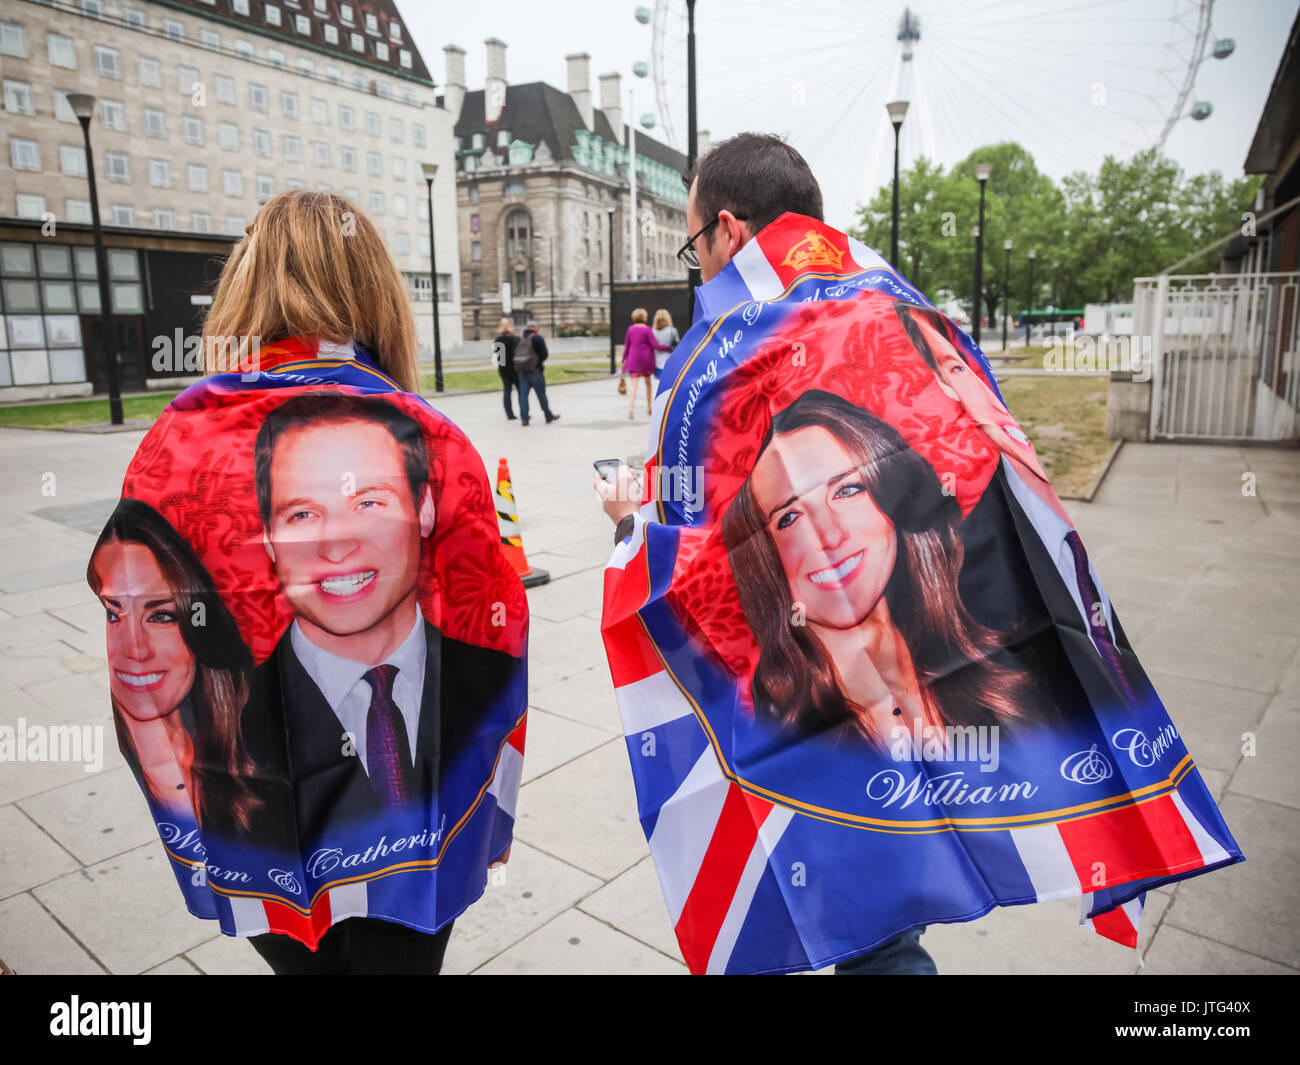 Royal fans wrapped in William and Kate celebration flags on the day of the Royal wedding of Prince William Wales and Kate Middleton. London, UK. Stock Photo